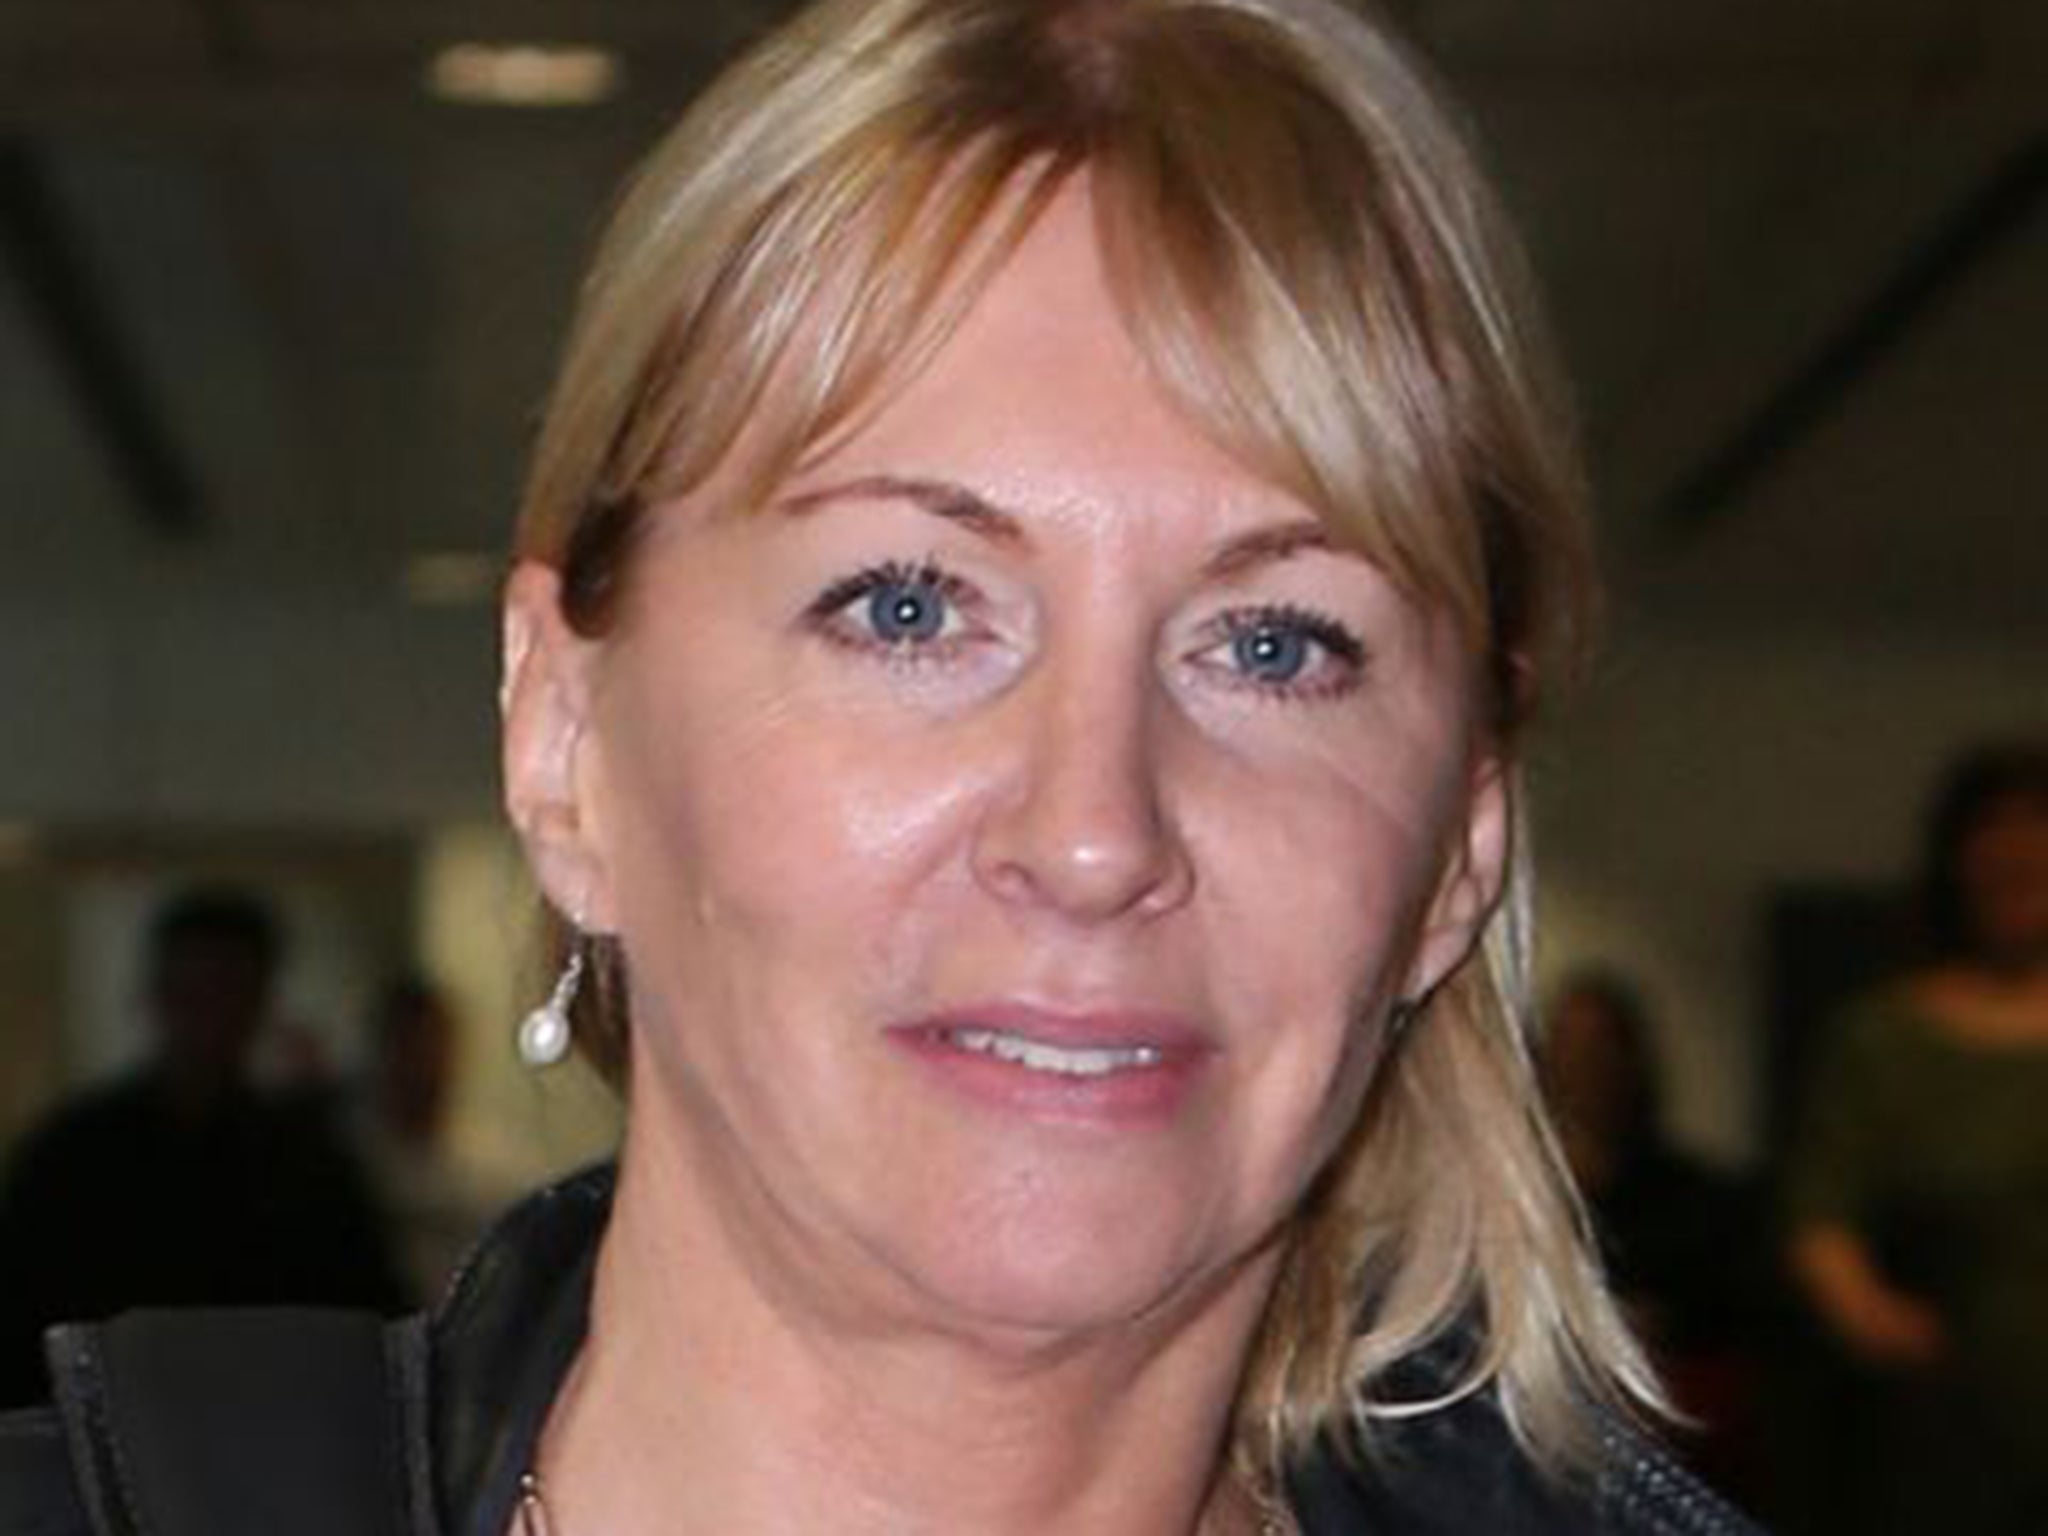 An attempt to unseat the Conservative MP Nadine Dorries has been thrown out by the High Court